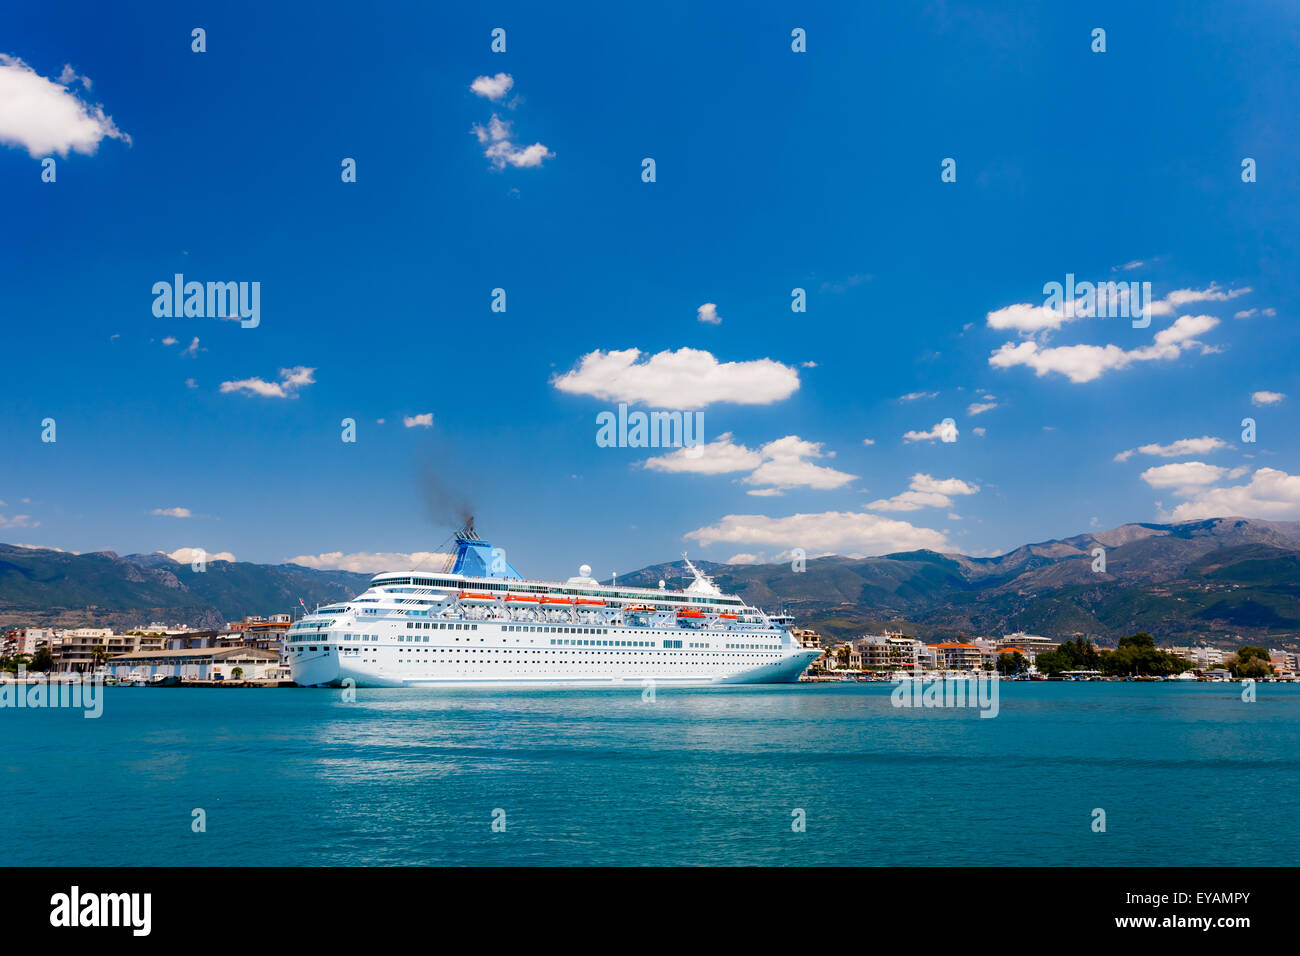 Big cruise ship anchored in port against a blue sky and clouds in Greece Stock Photo